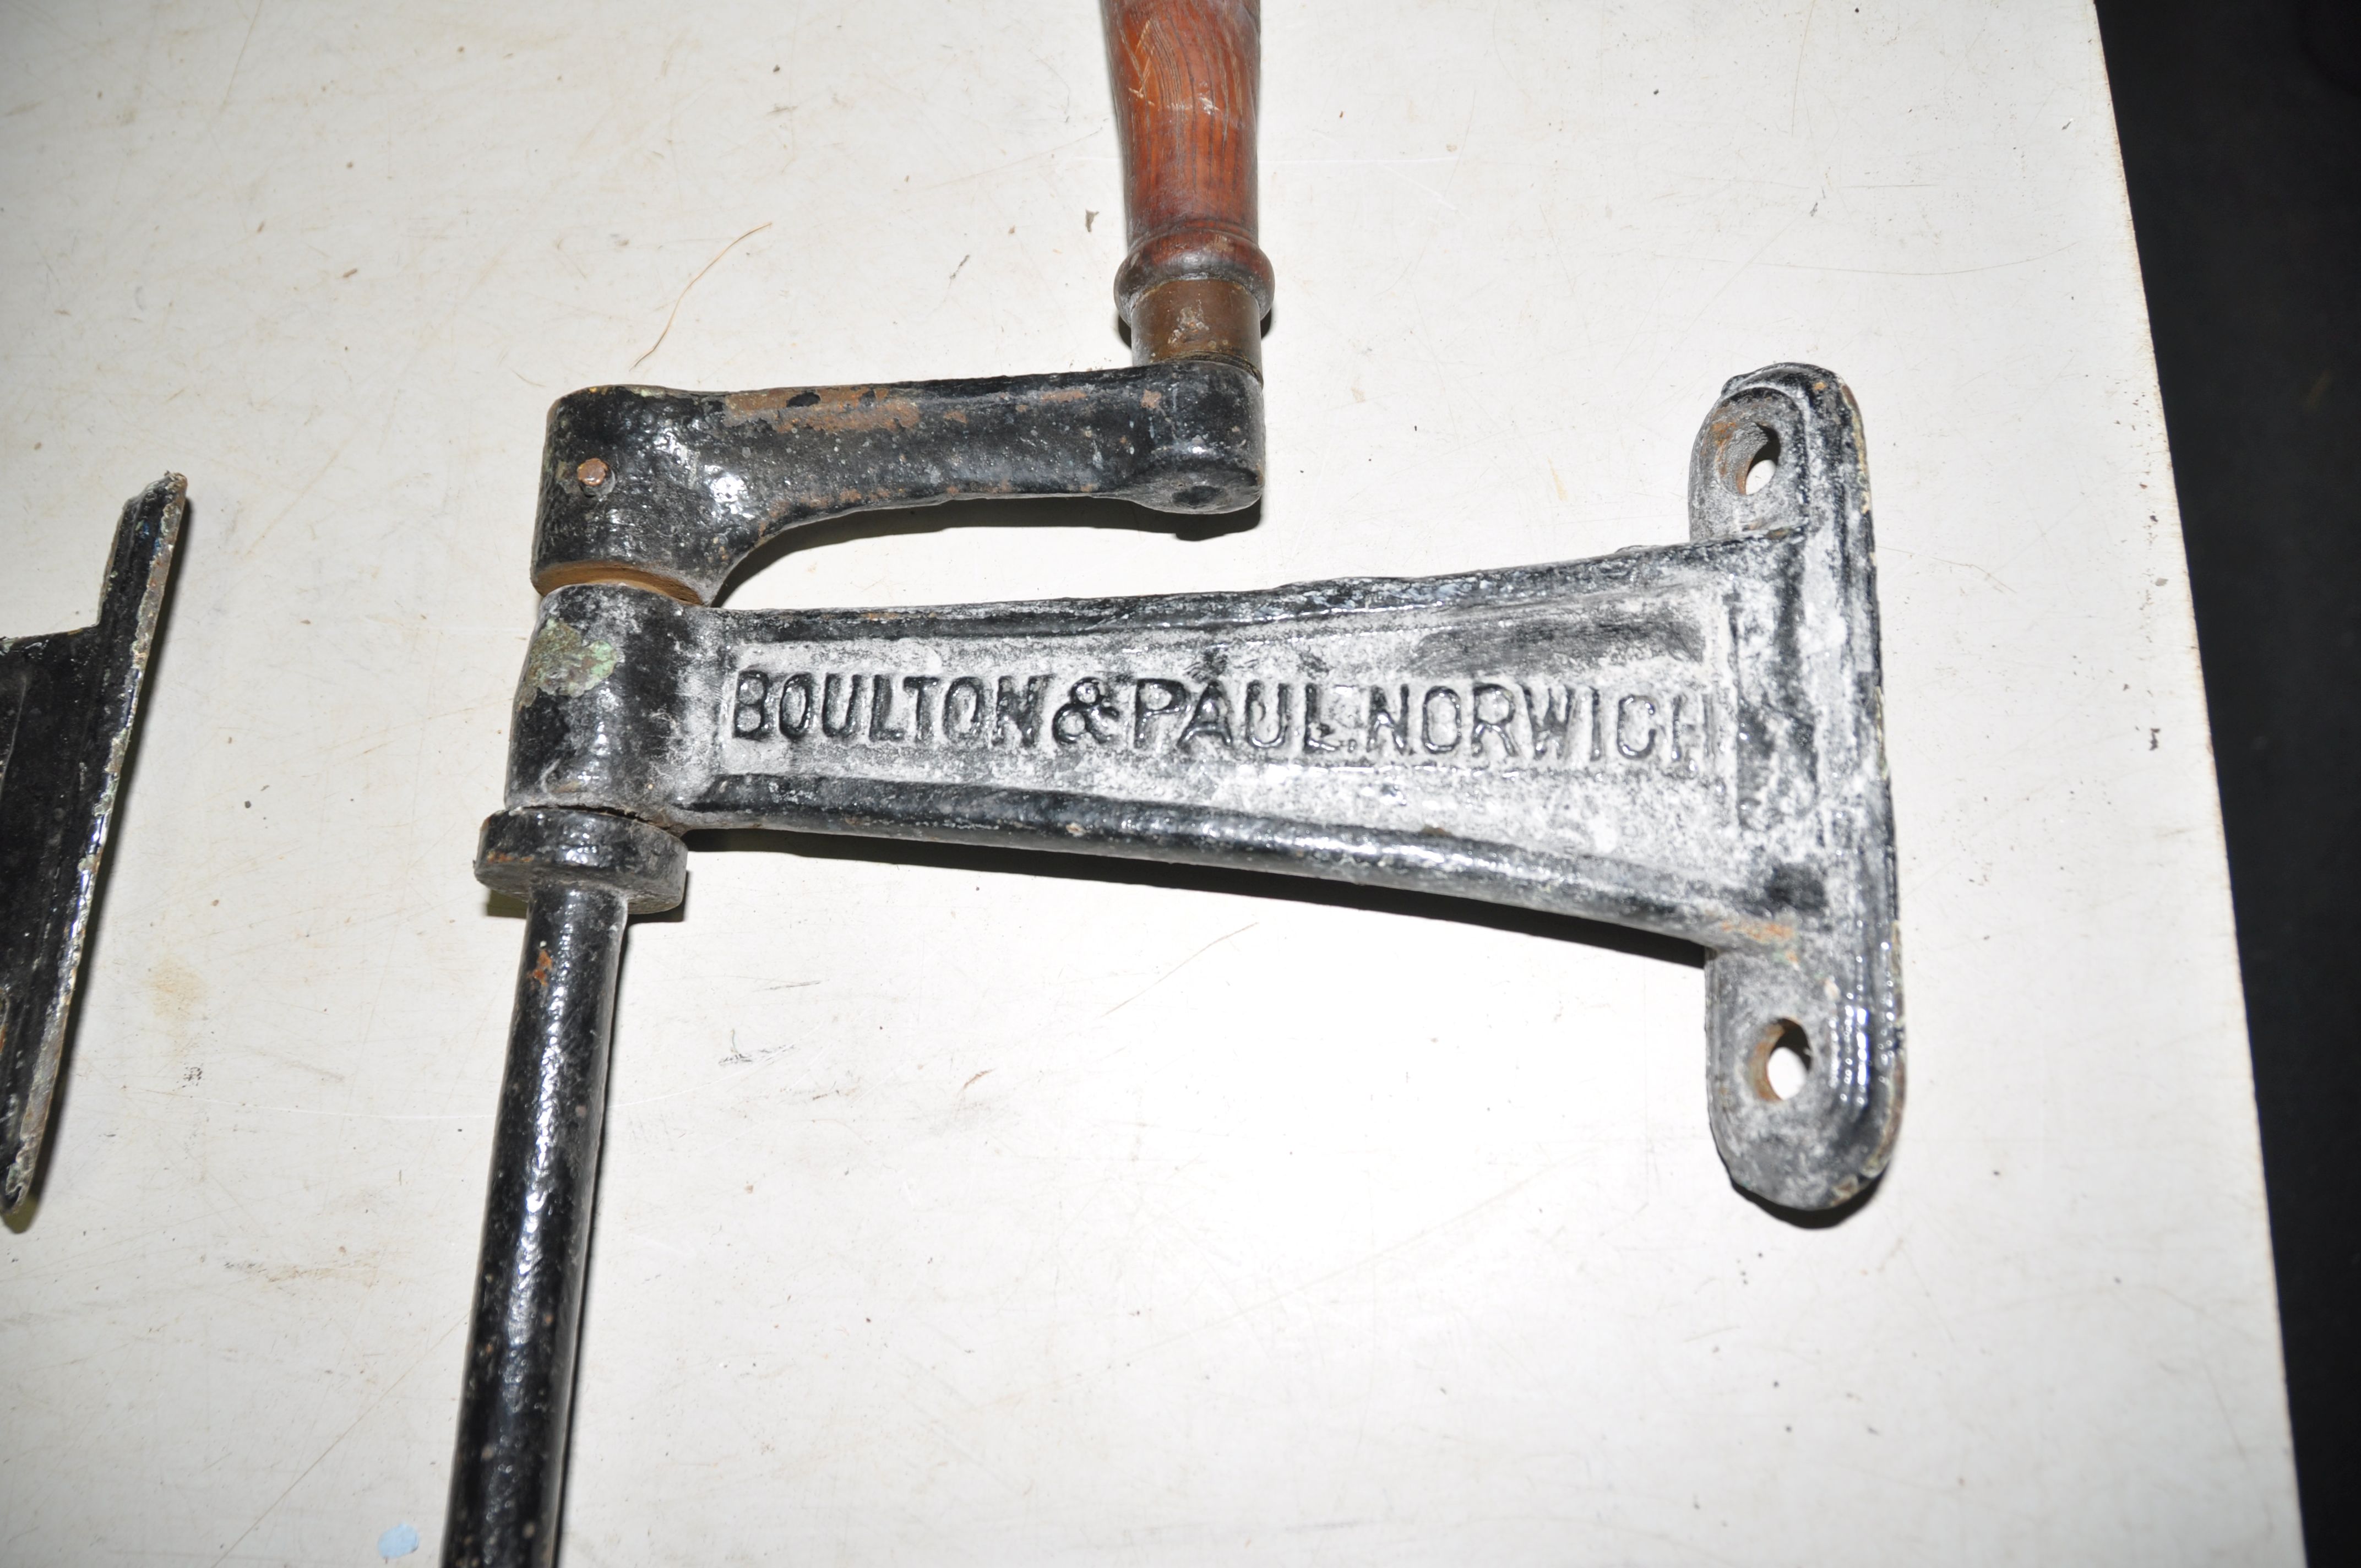 A PAIR OF BOULTON AND PAUL OF NORWICH VINTAGE SCREWJACK WINDOW OPENERS (2) - Image 2 of 3